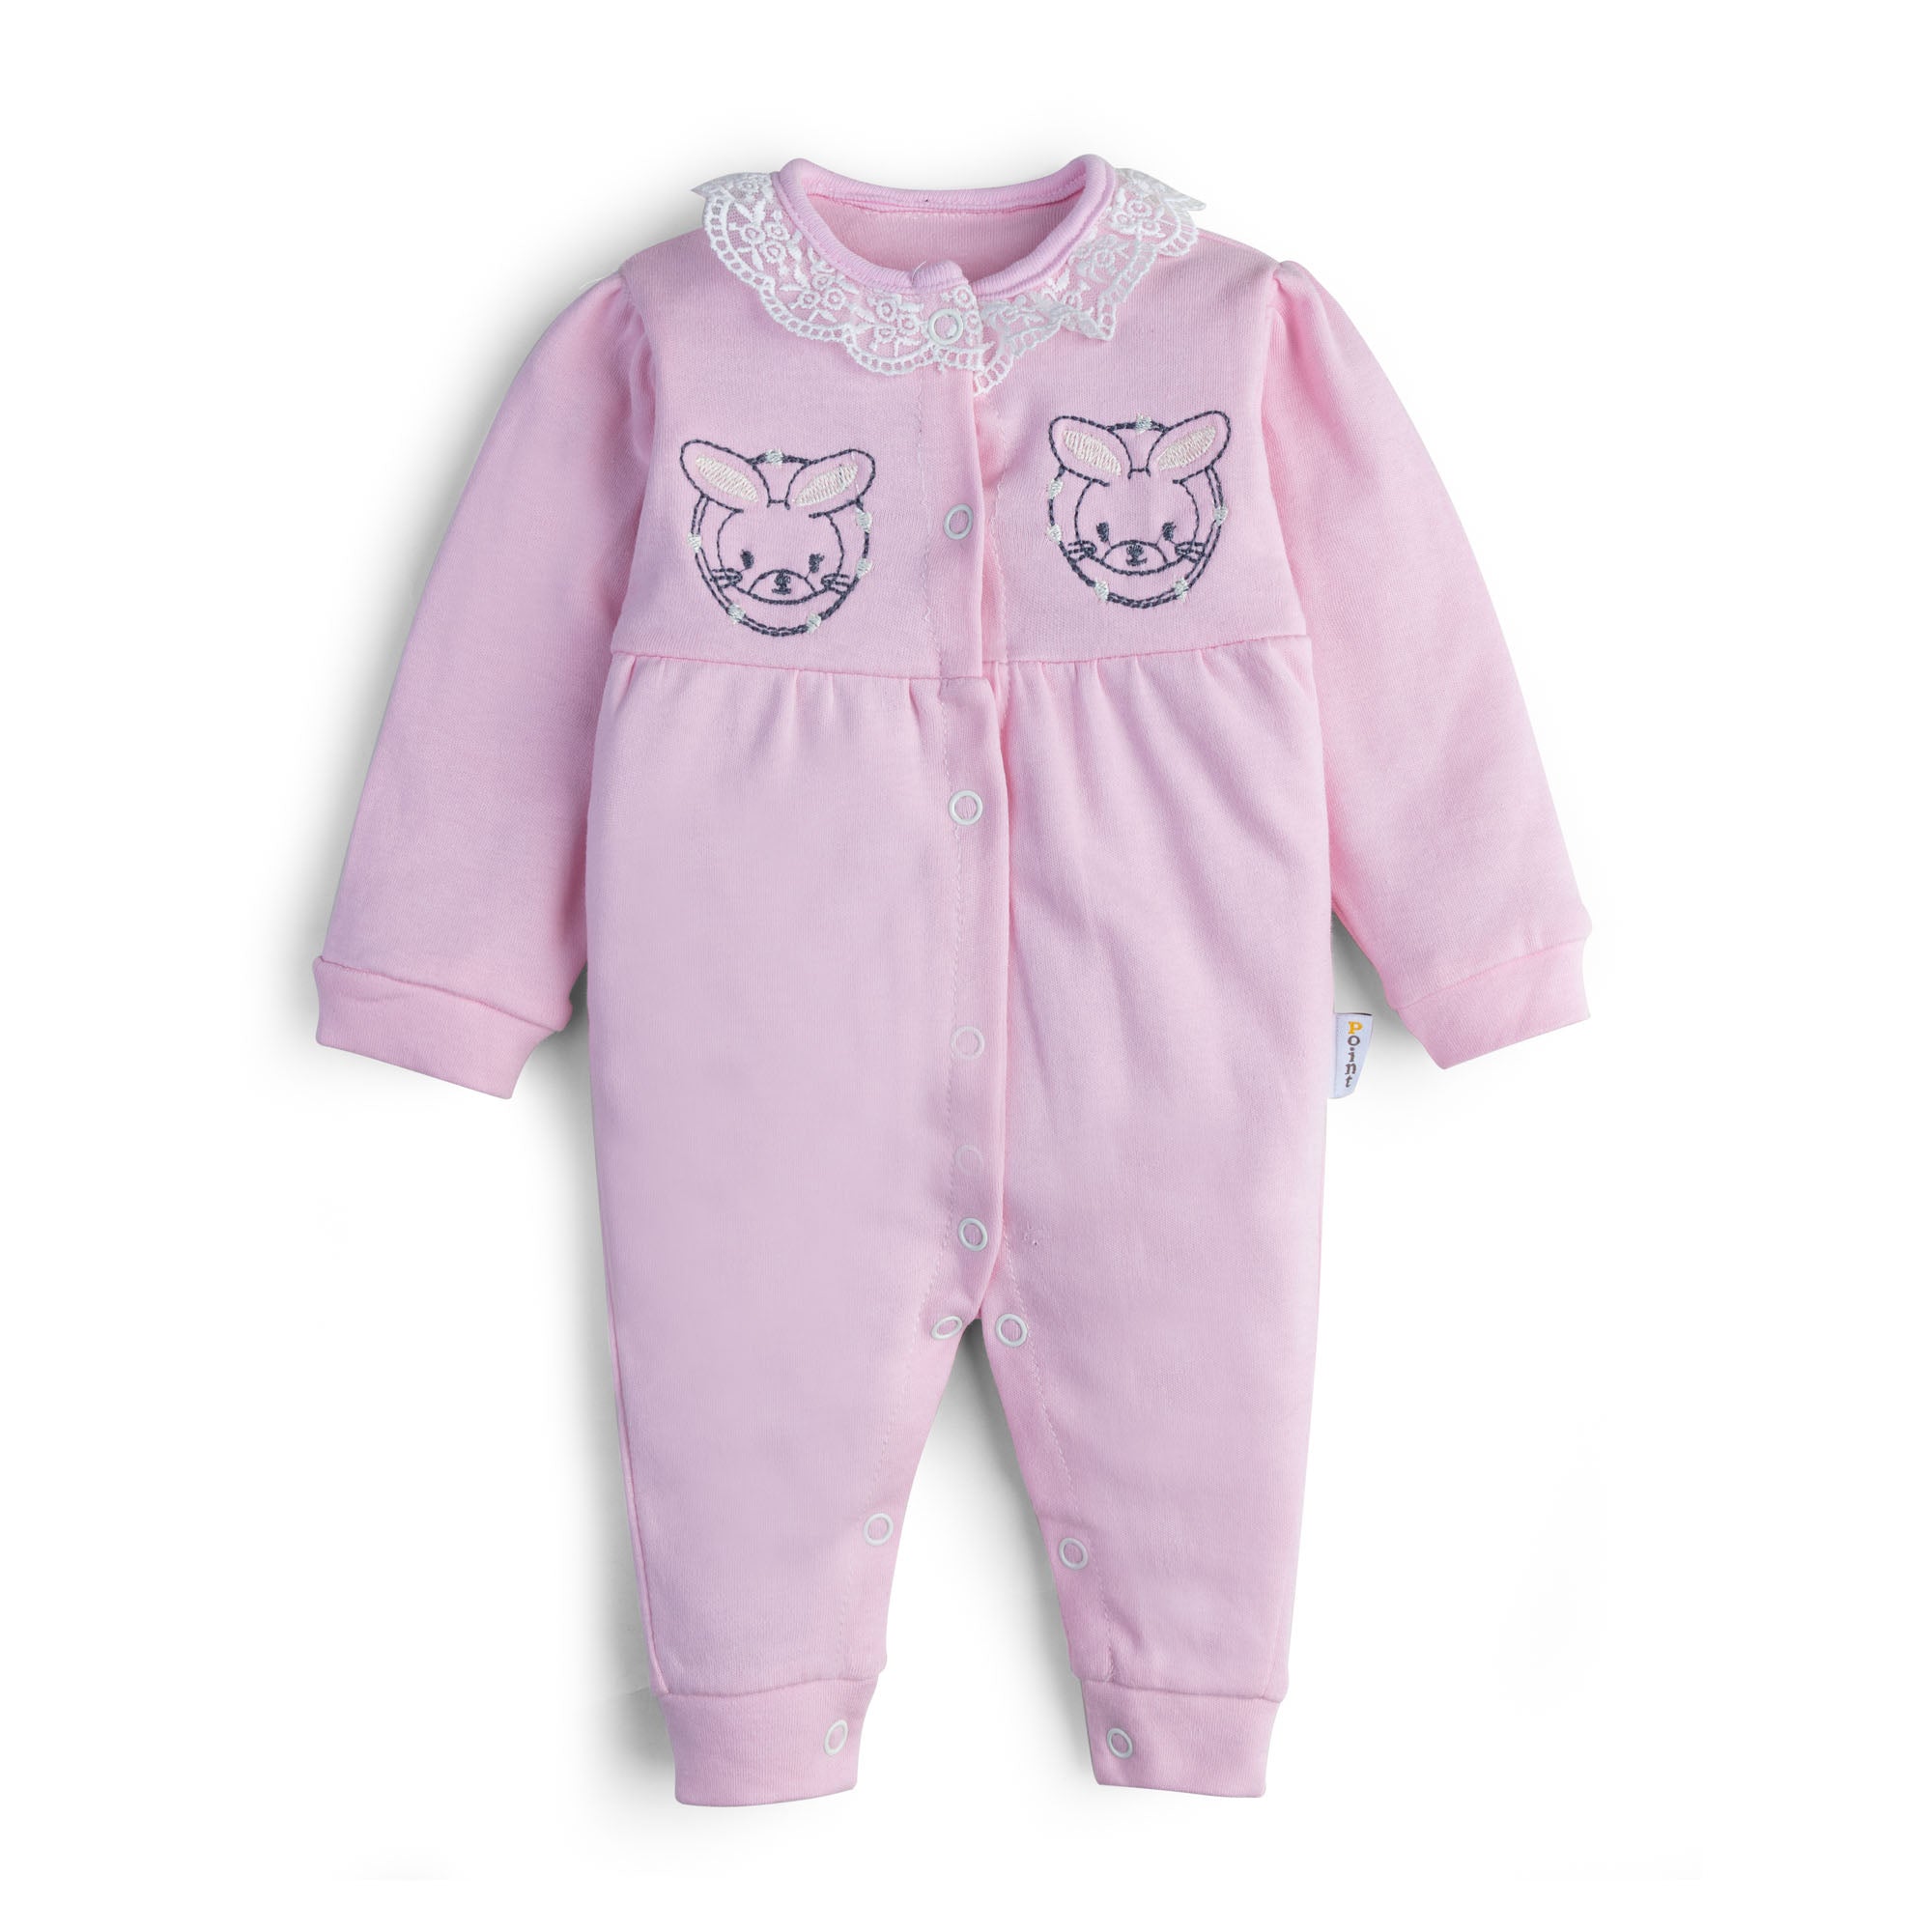 Meow Pink Infant 7-Pack